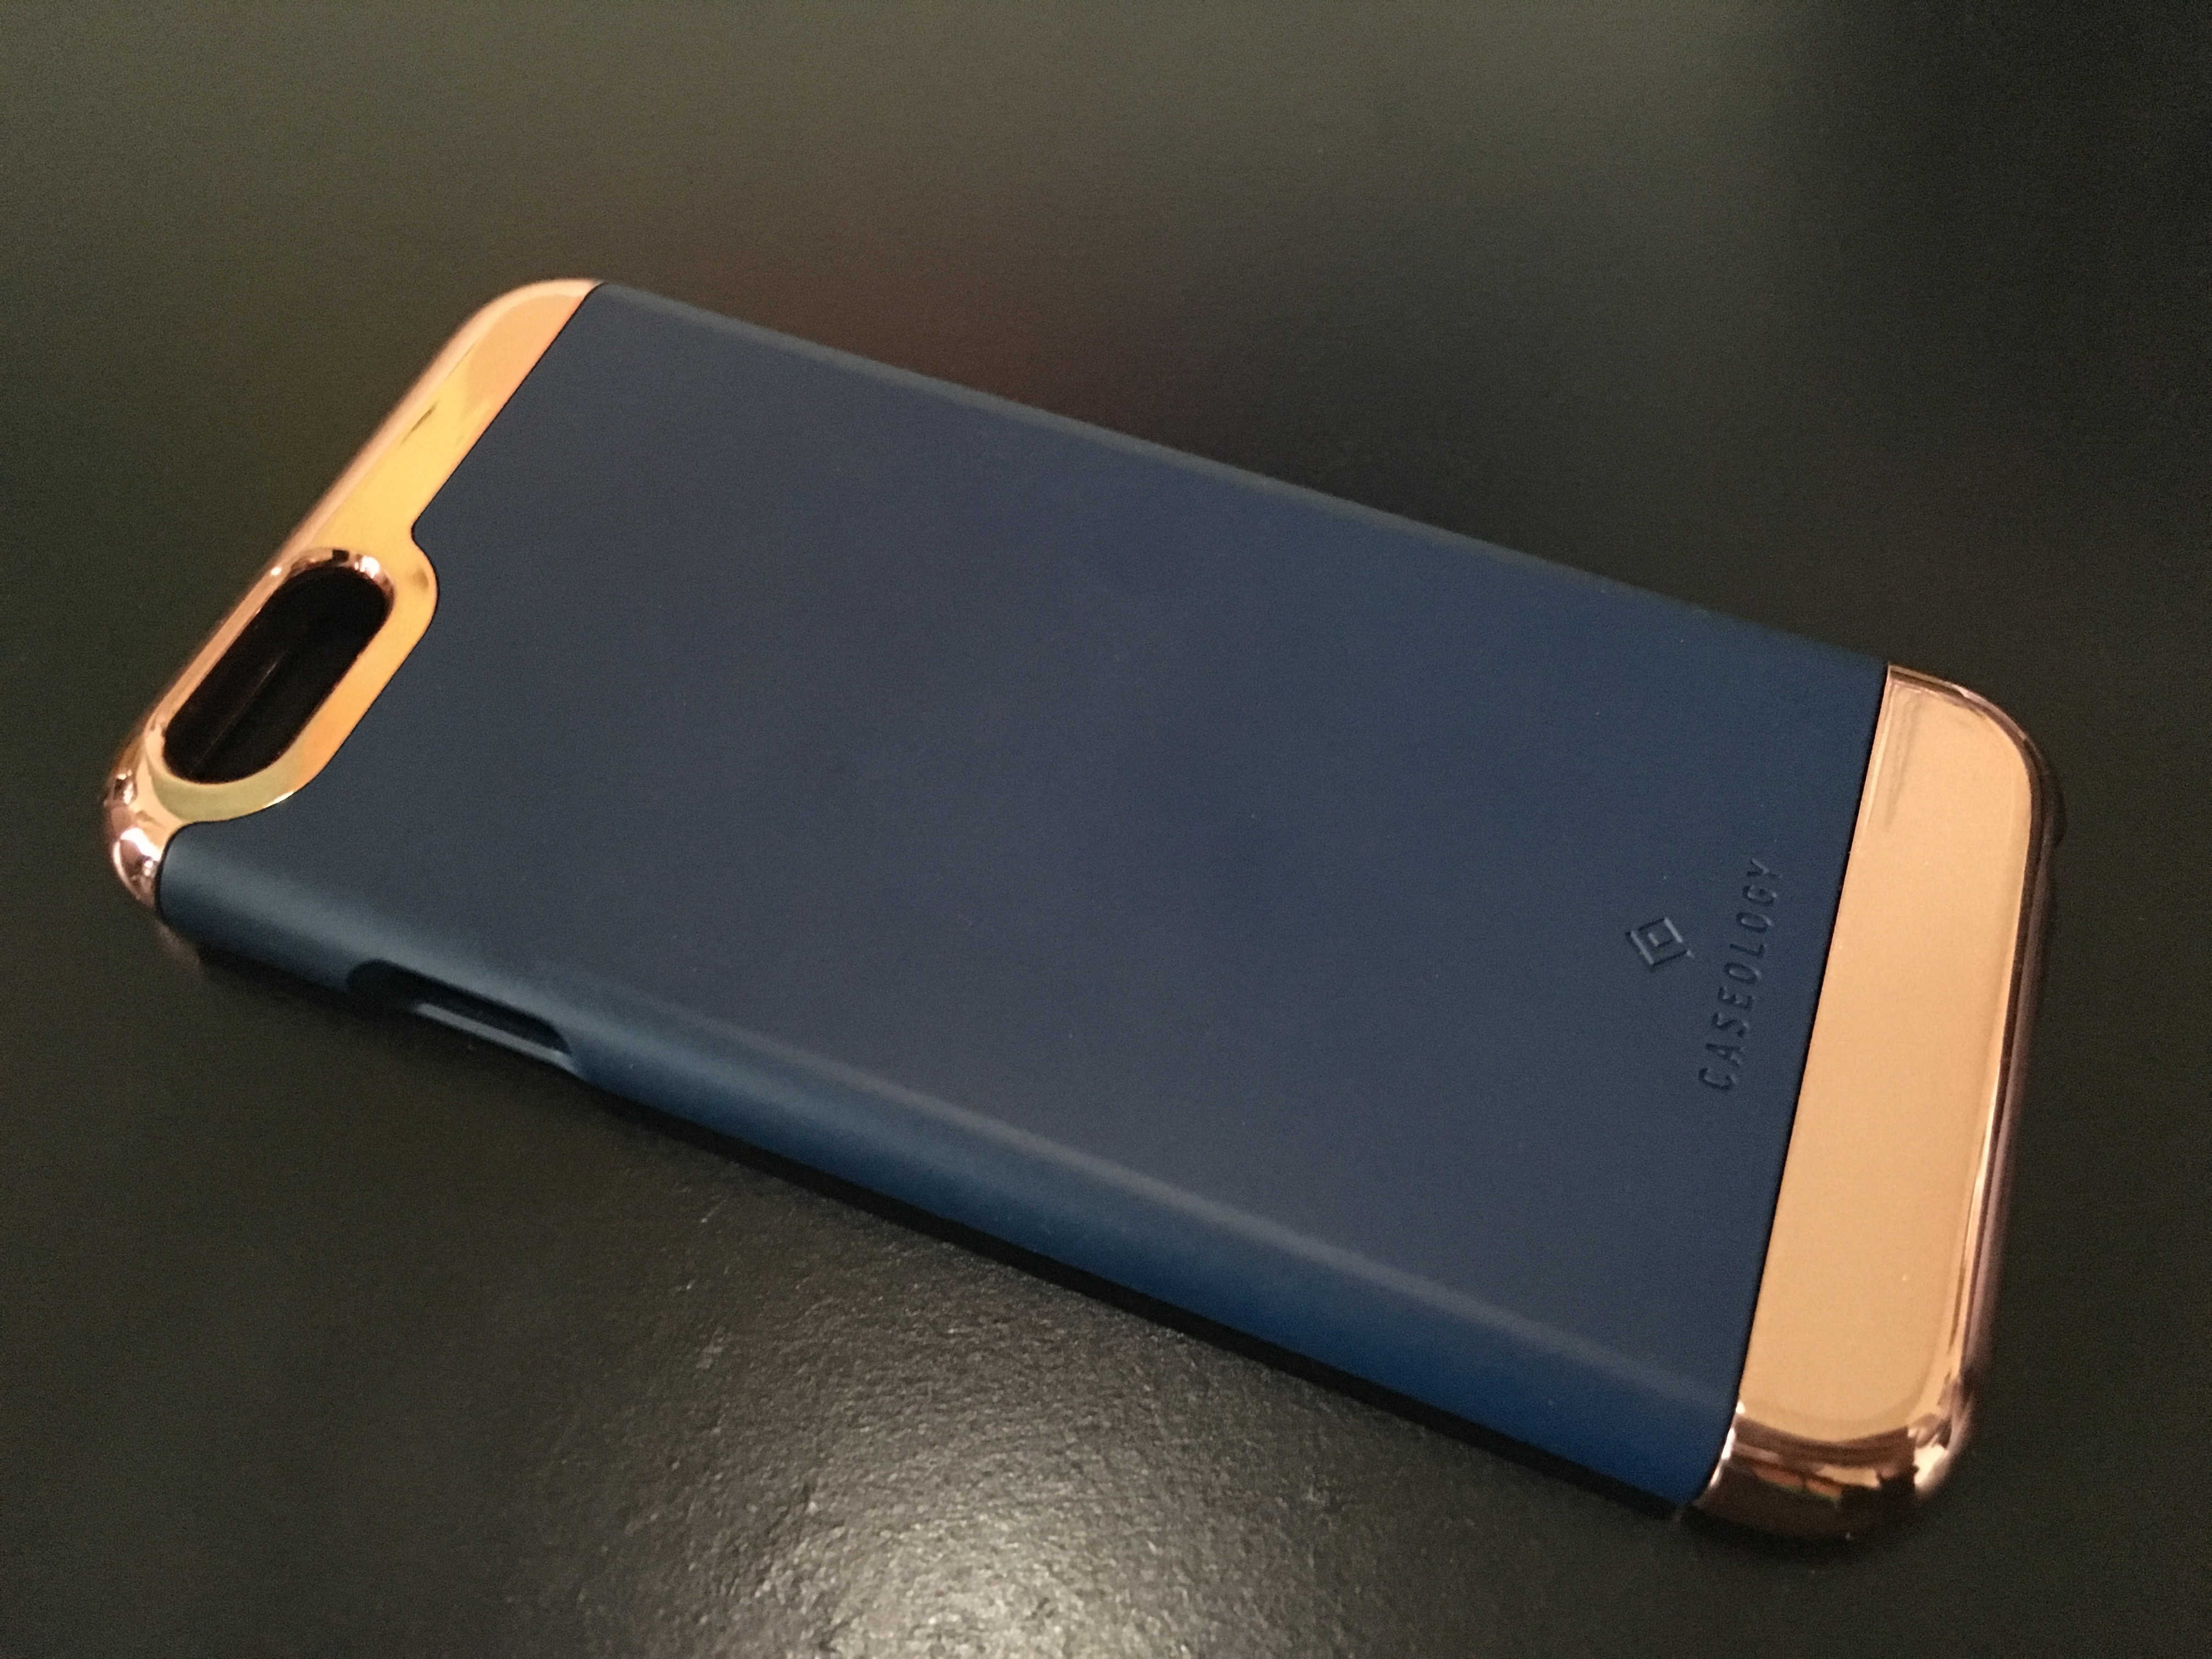 caseology-review-4-of-the-nicest-iphone-6s-cases